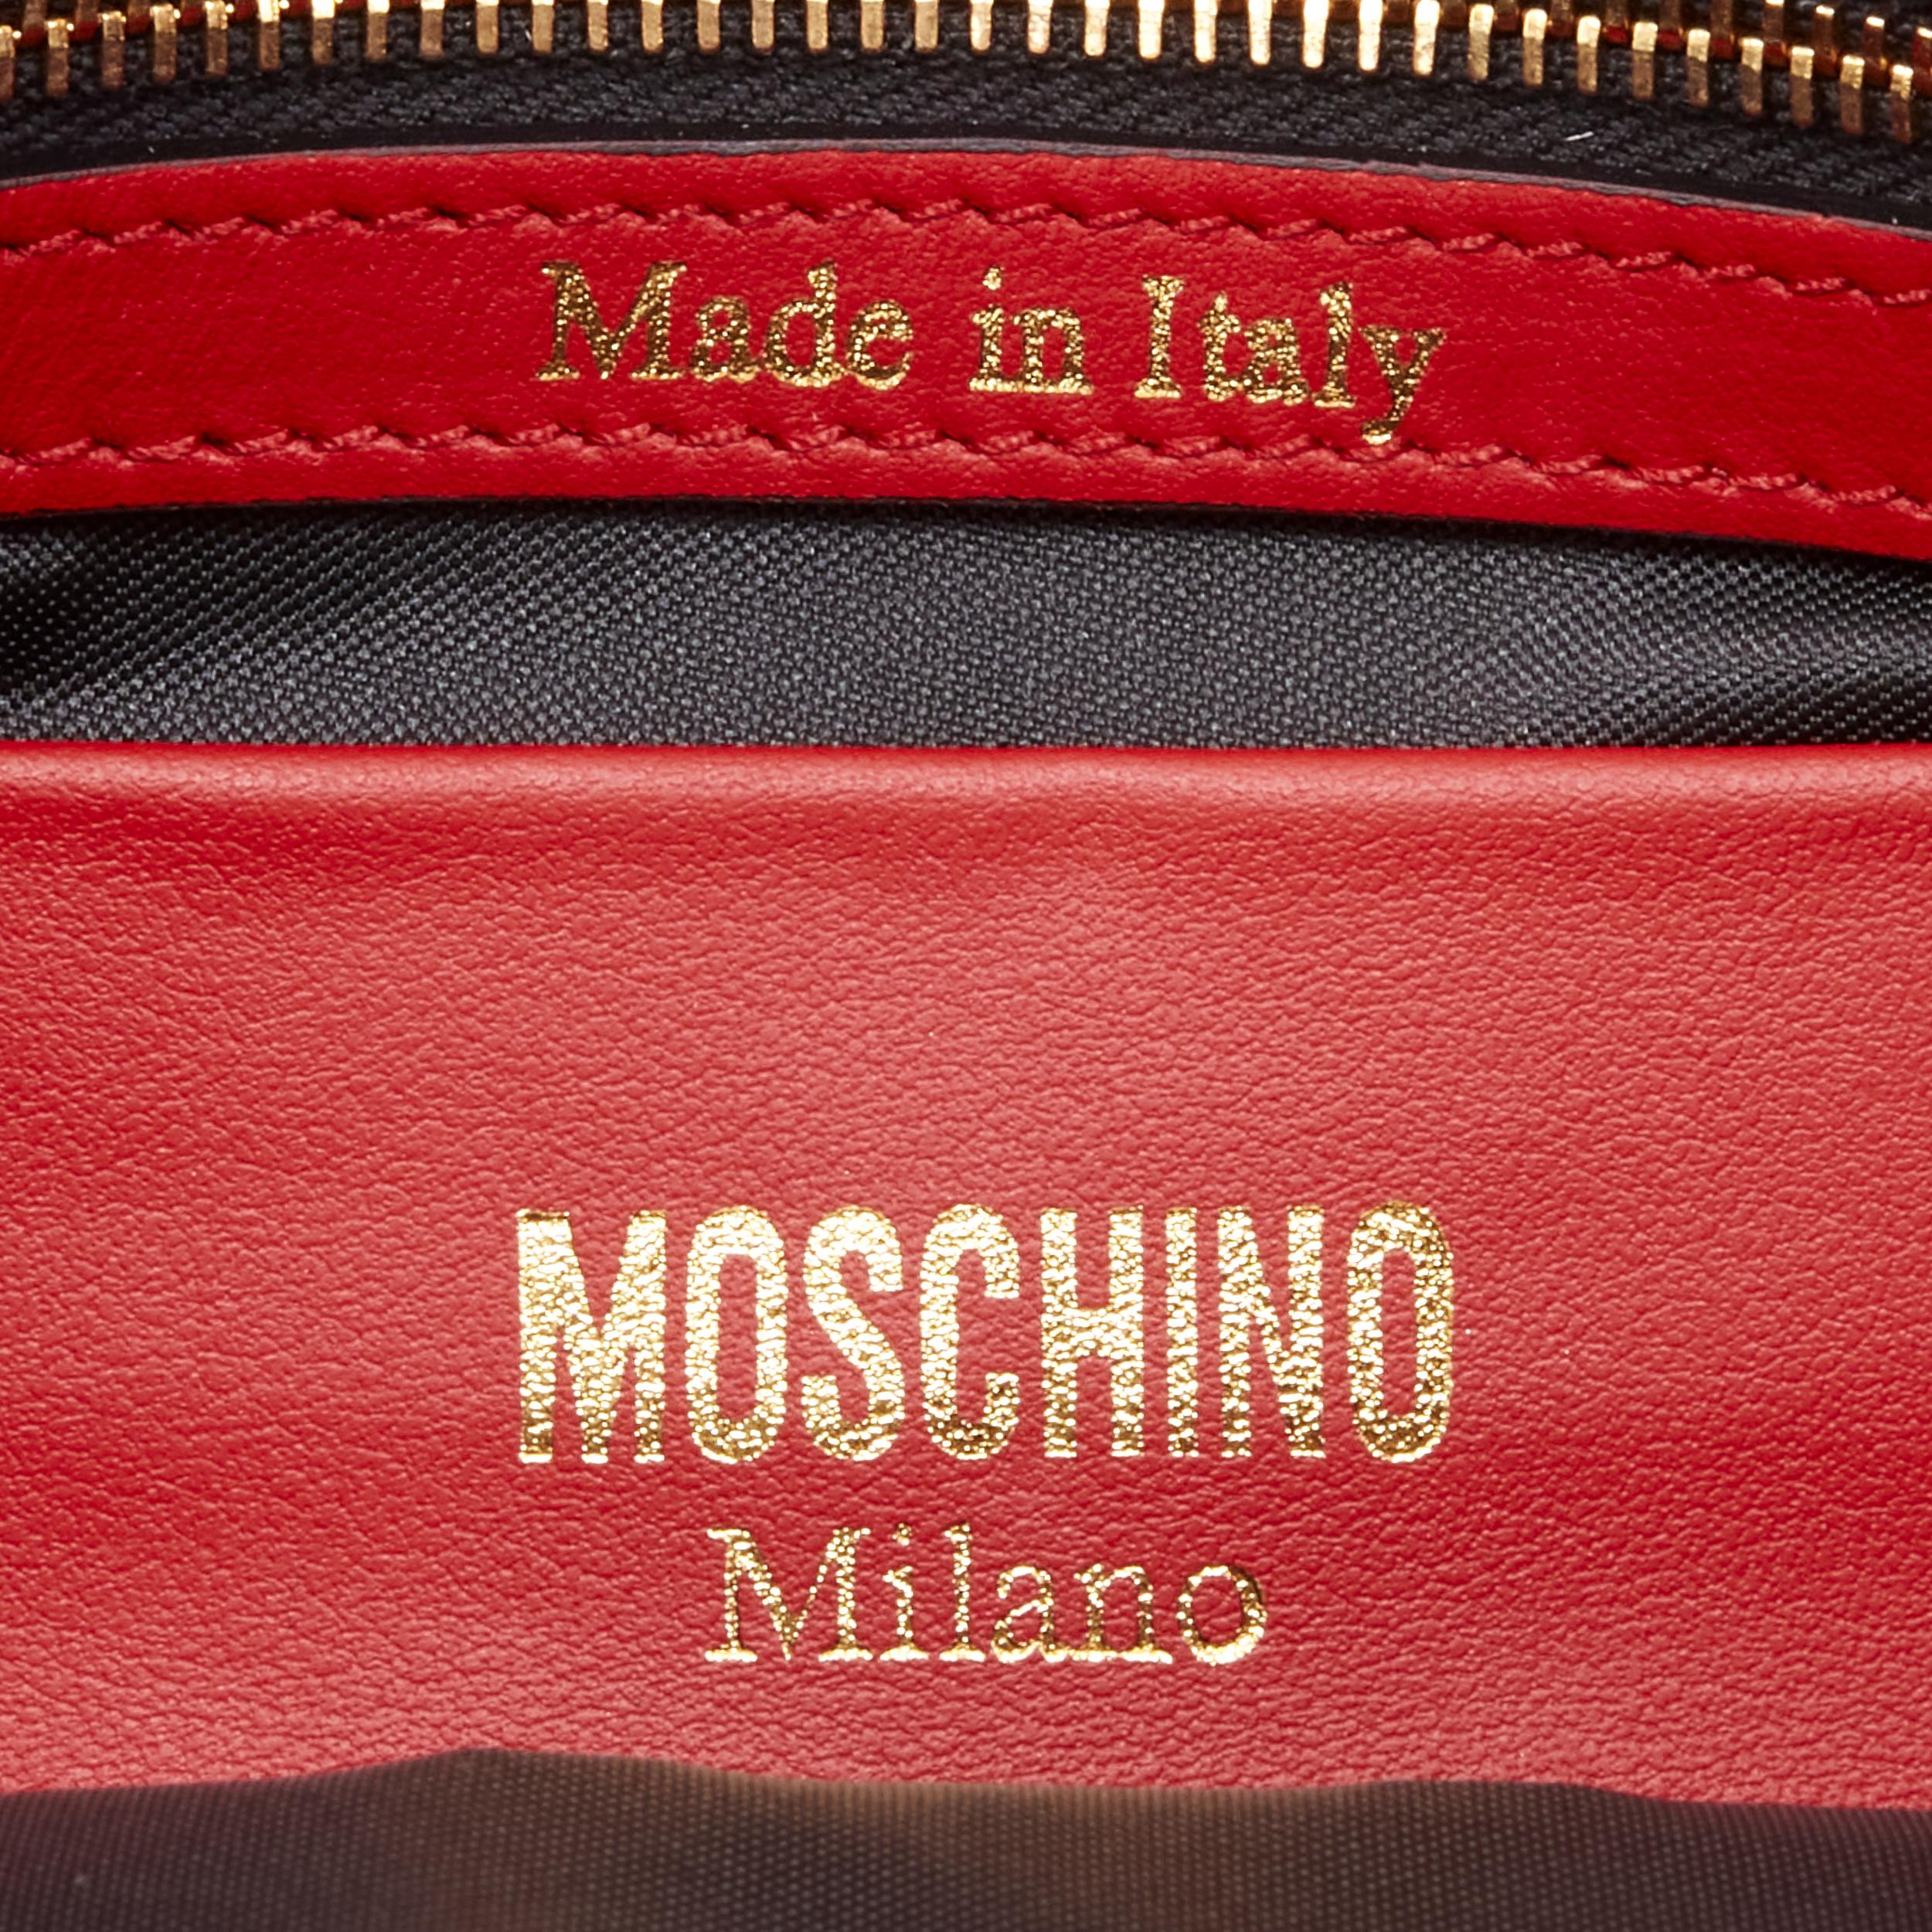 Women's new MOSCHINO Couture! smooth red leather gold M top zip wristlet clutch bag For Sale